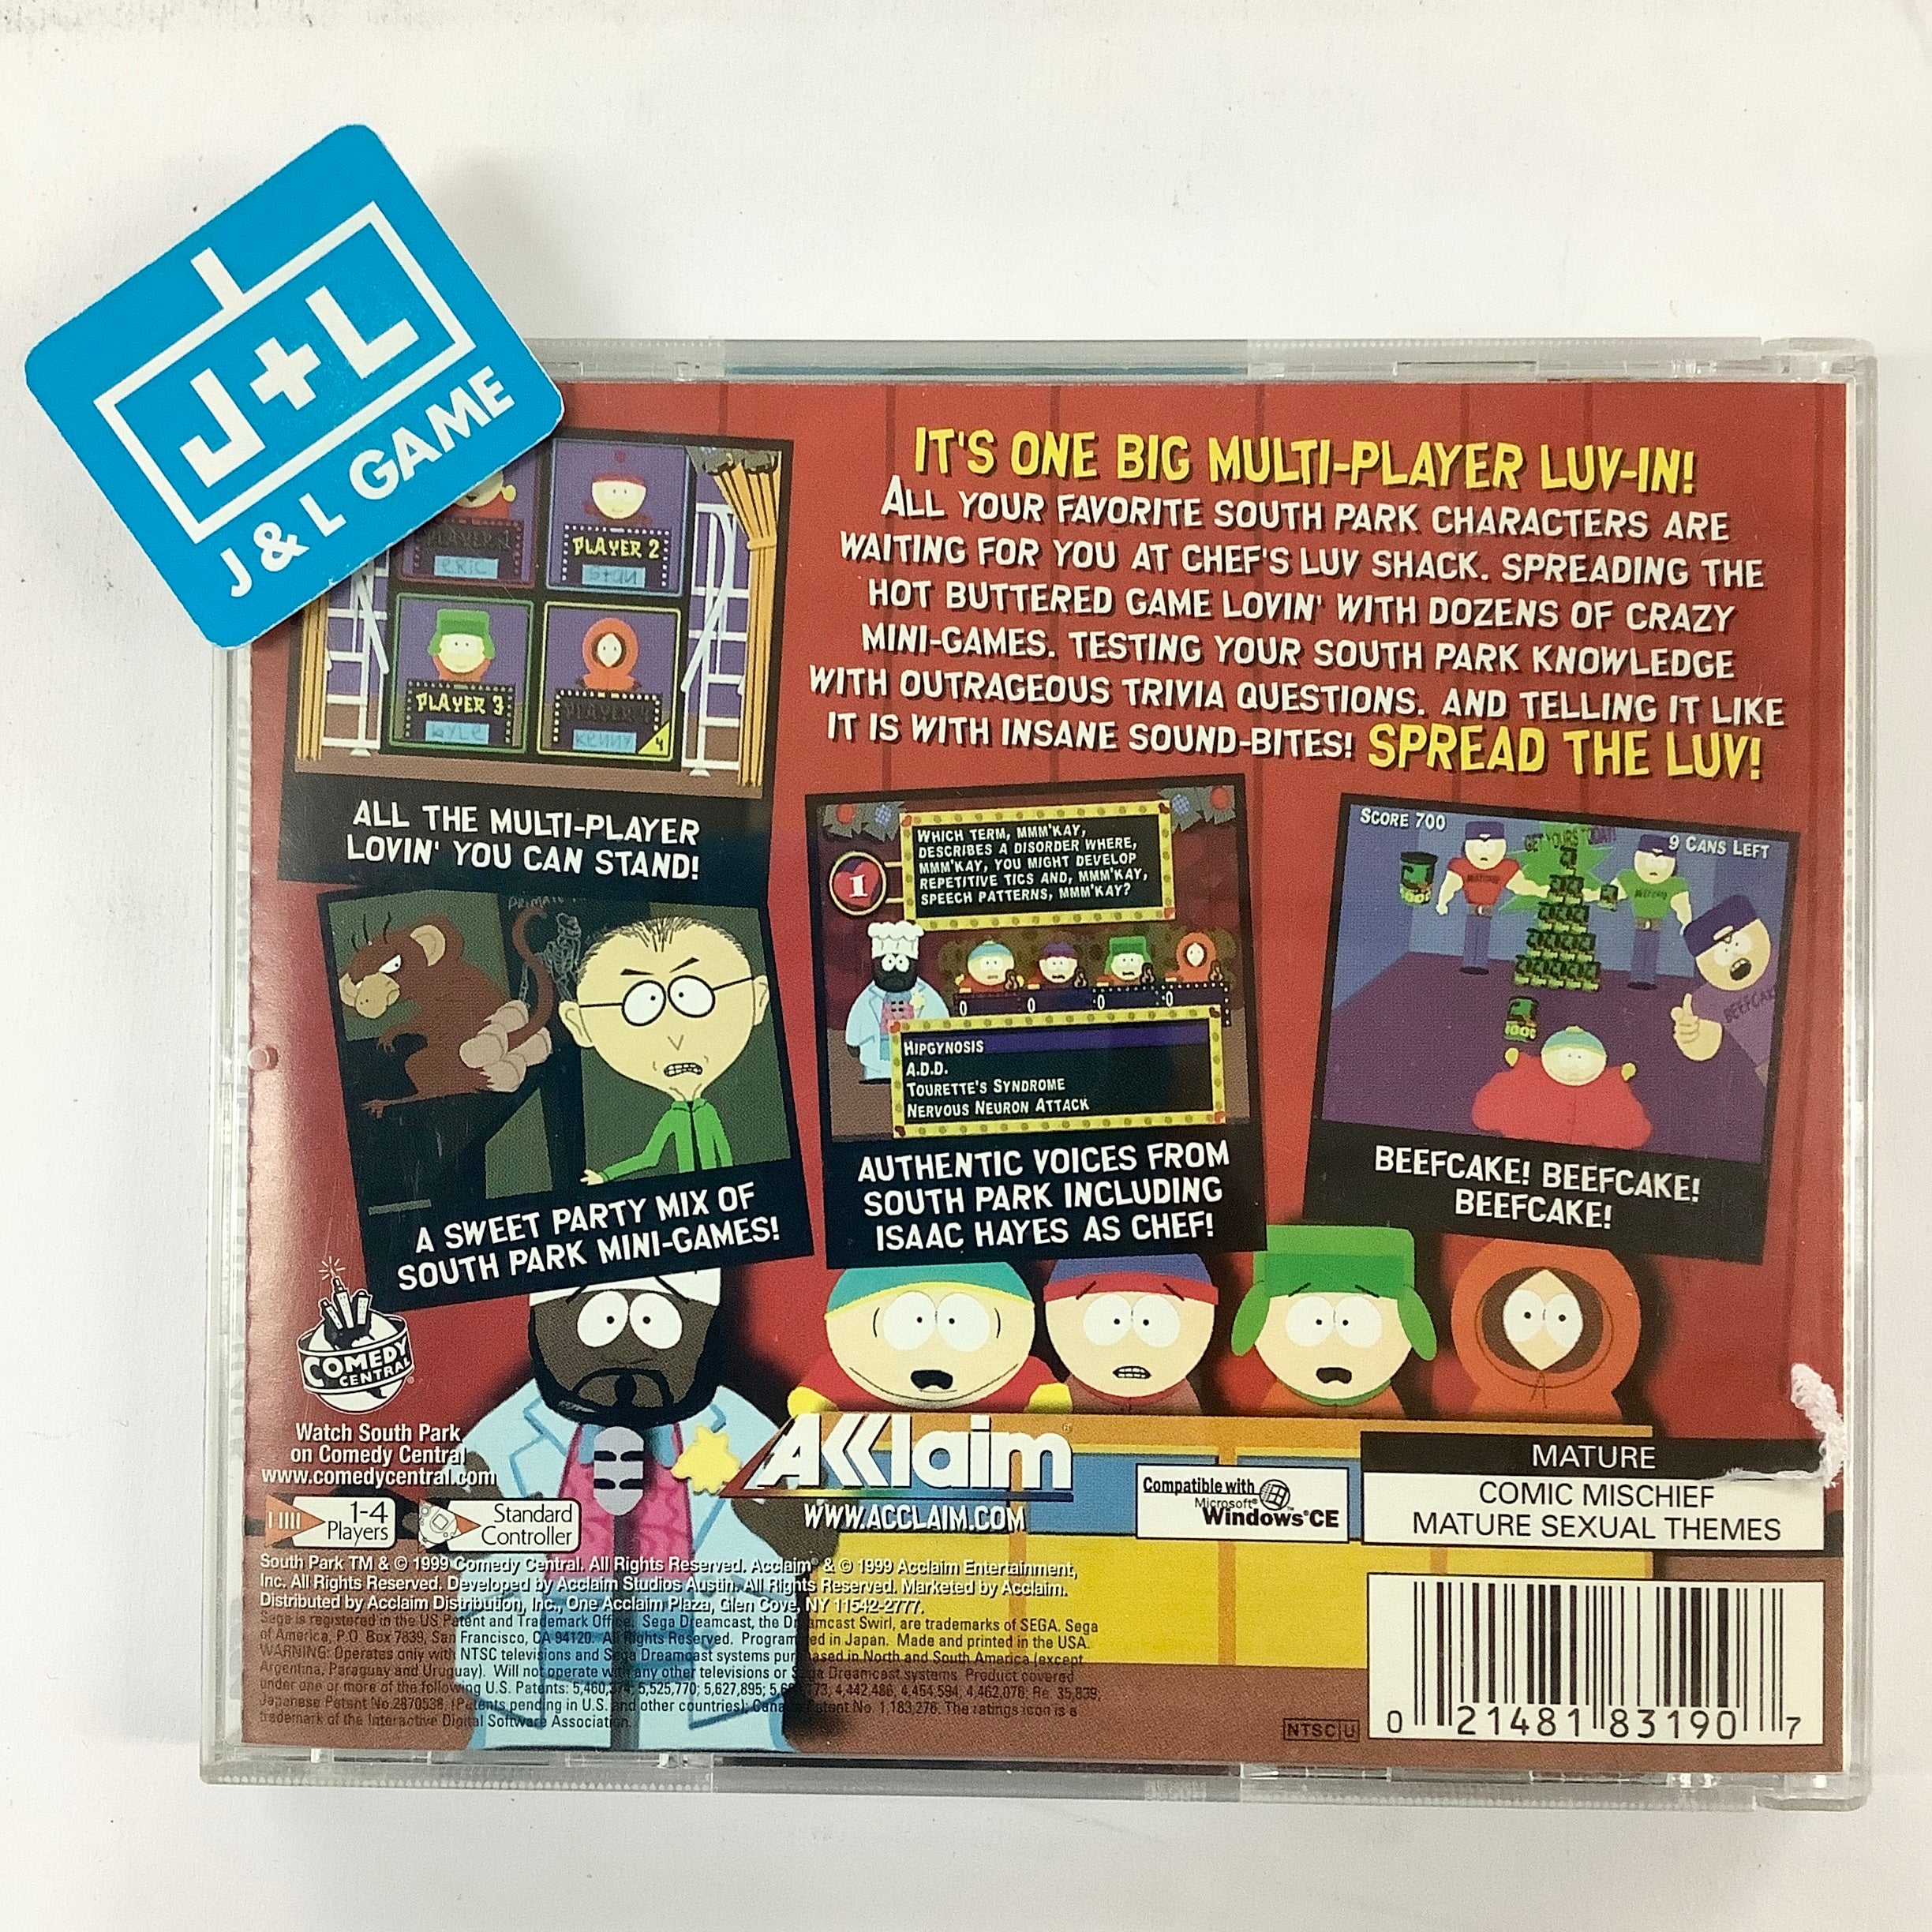 South Park: Chef's Luv Shack - (DC) SEGA Dreamcast [Pre-Owned] Video Games Acclaim   